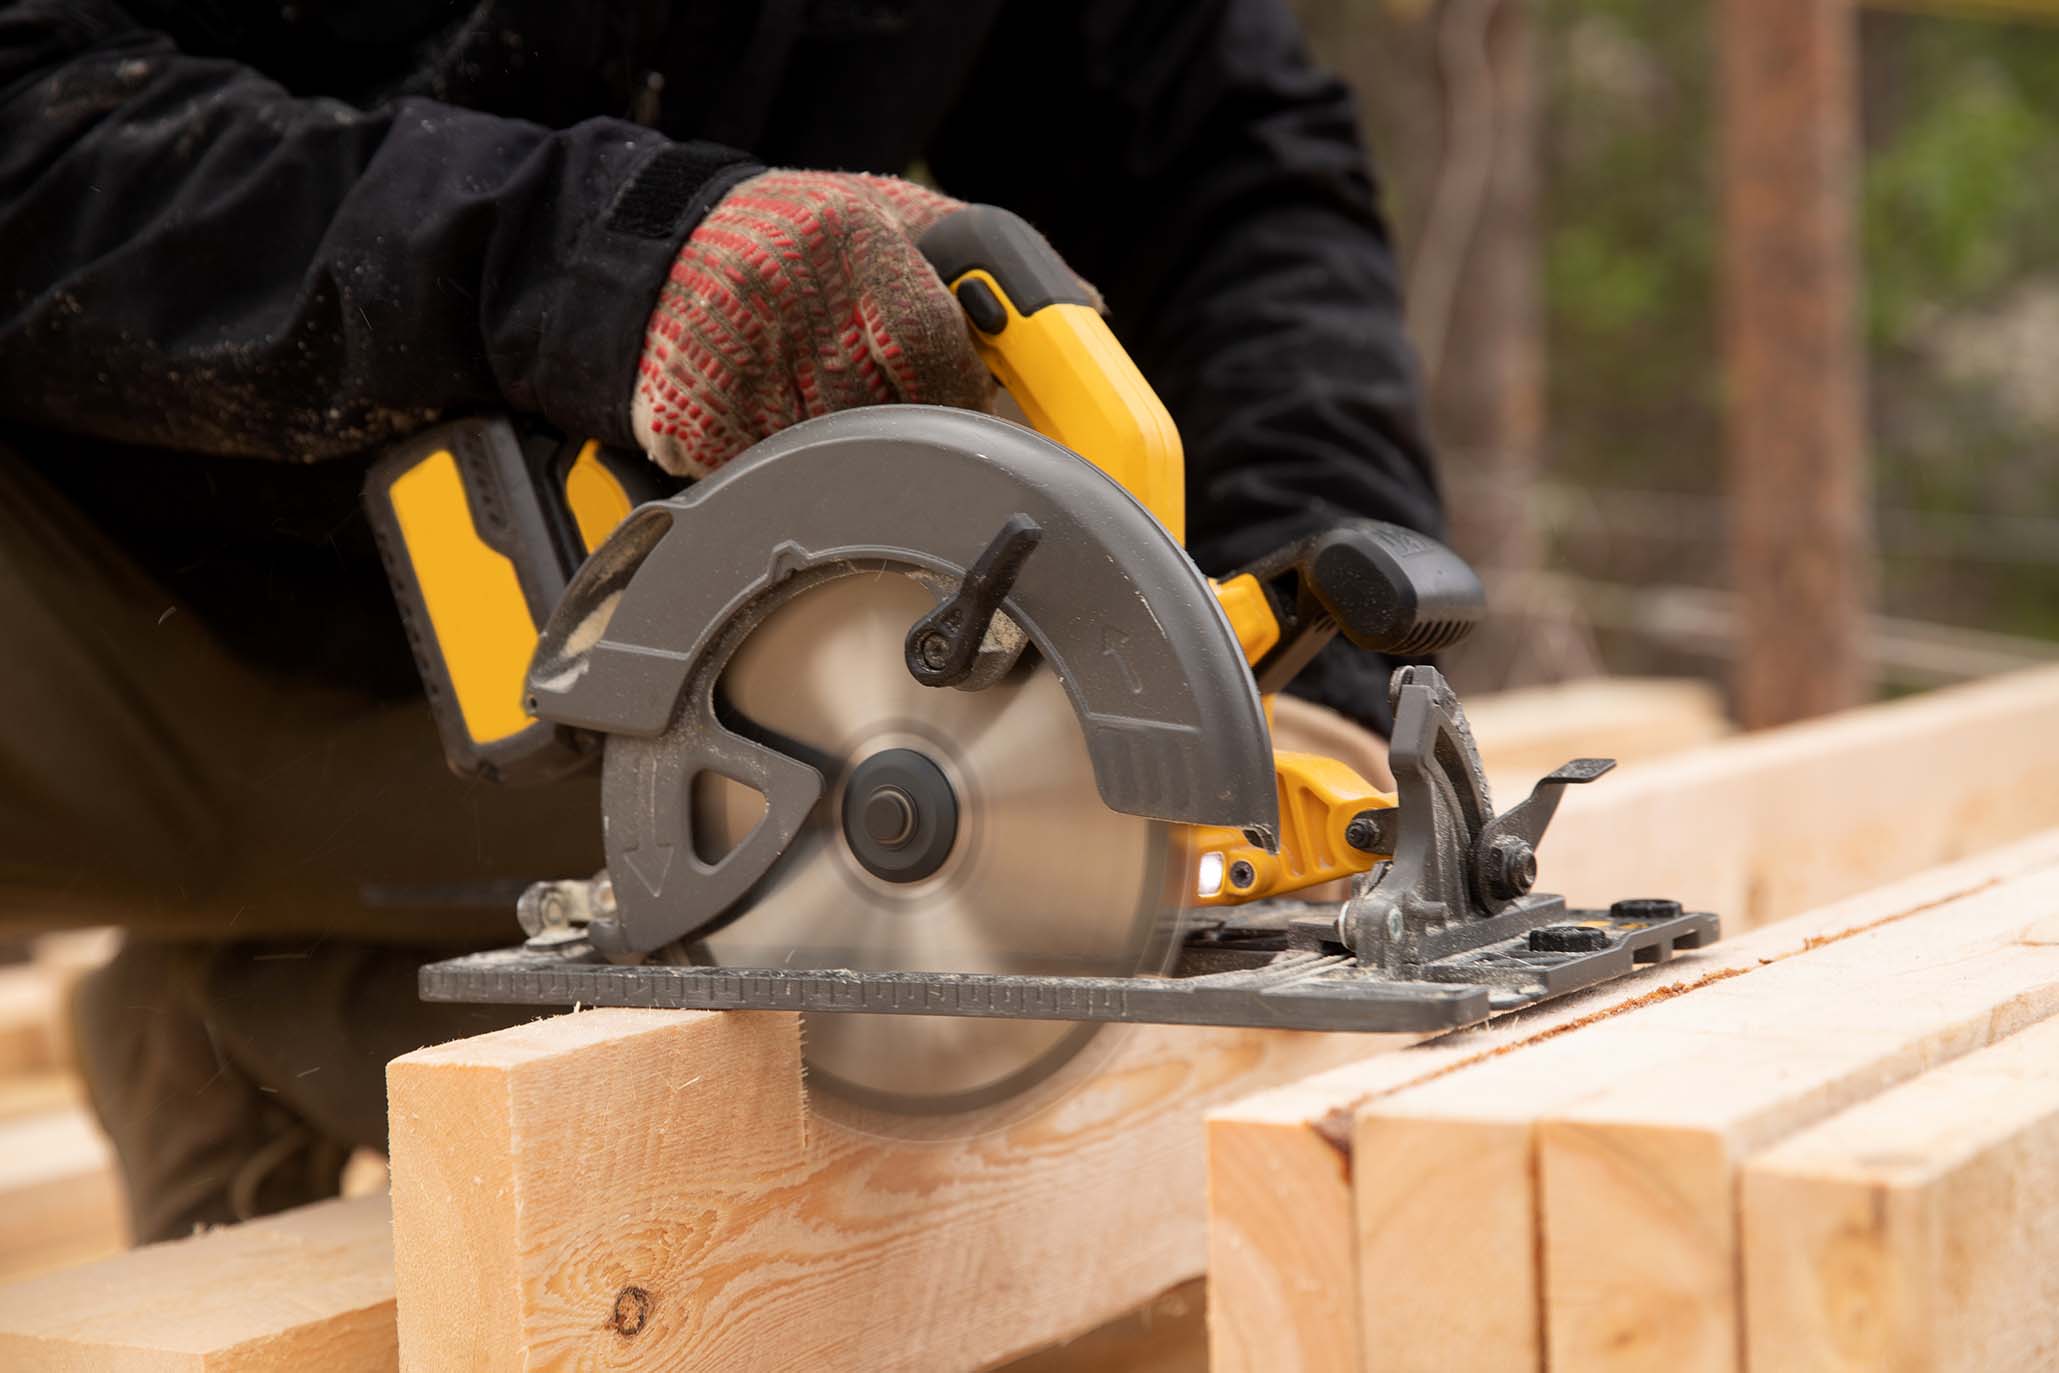 Types of Saws, Their Uses & Safety Tips - Grainger KnowHow